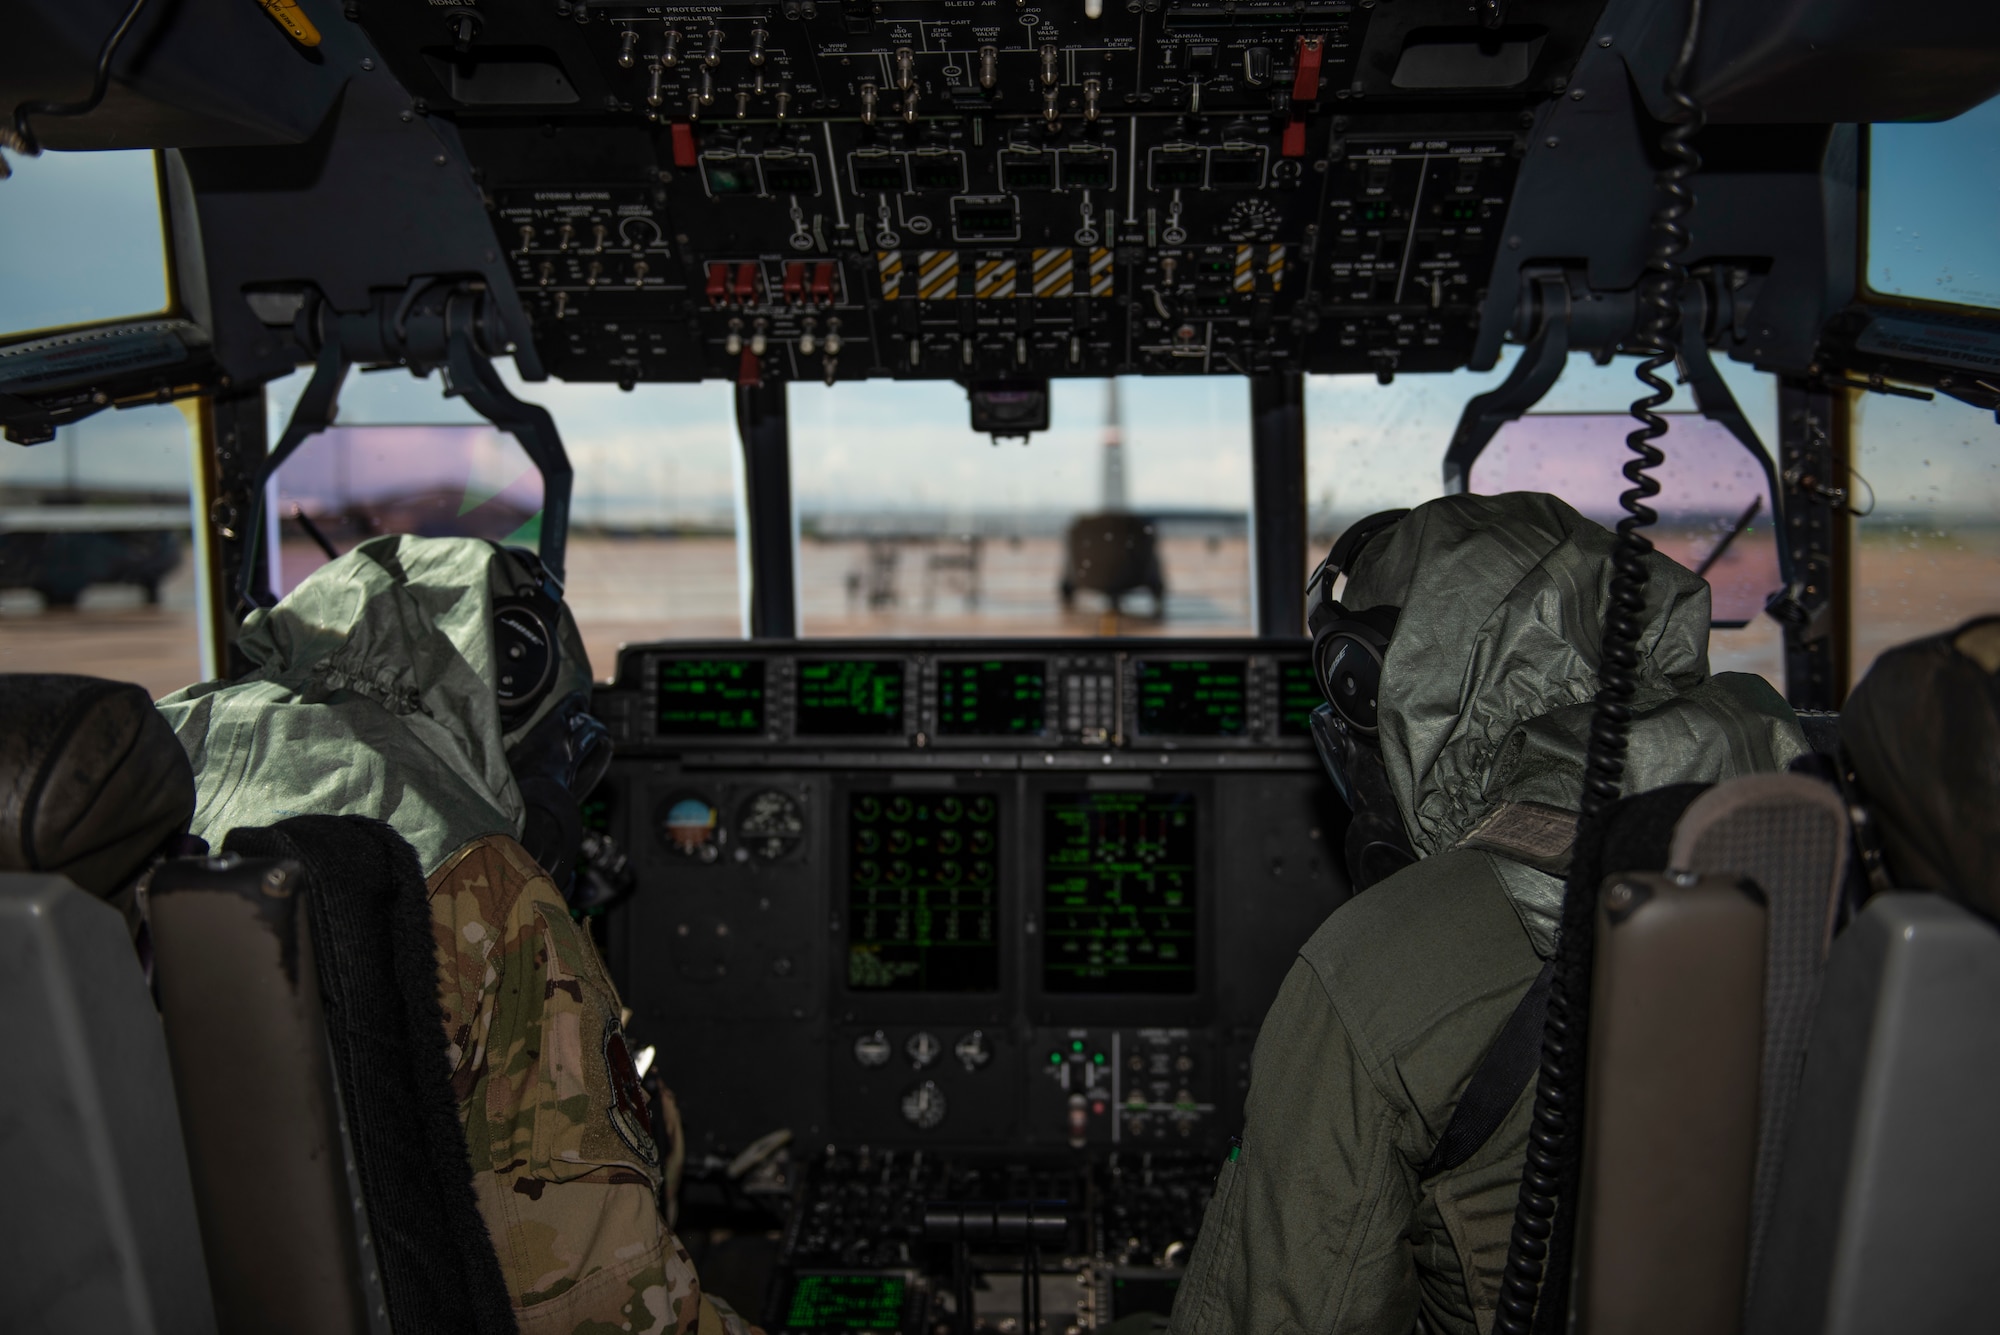 Capt. Miranda Mila, left, and 1st Lt. Coltan Nading, both 40th Airlift Squadron pilots, conducts preflight checks in the cockpit of a C-130J Super Hercules at Dyess Air Force Base, Texas, June 2, 2021. Mila and Nading were part of a four-person team who participated in the functionality testing of the new Two-Piece Undergarment universal integrative ensemble chemical protective suit. During these tests, the C-130 aircrew engaged in standard aircraft preflight and ground egress procedures in order to test the operational ability of the new chemical gear. (U.S. Air Force photo by Airman 1st Class Colin Hollowell)